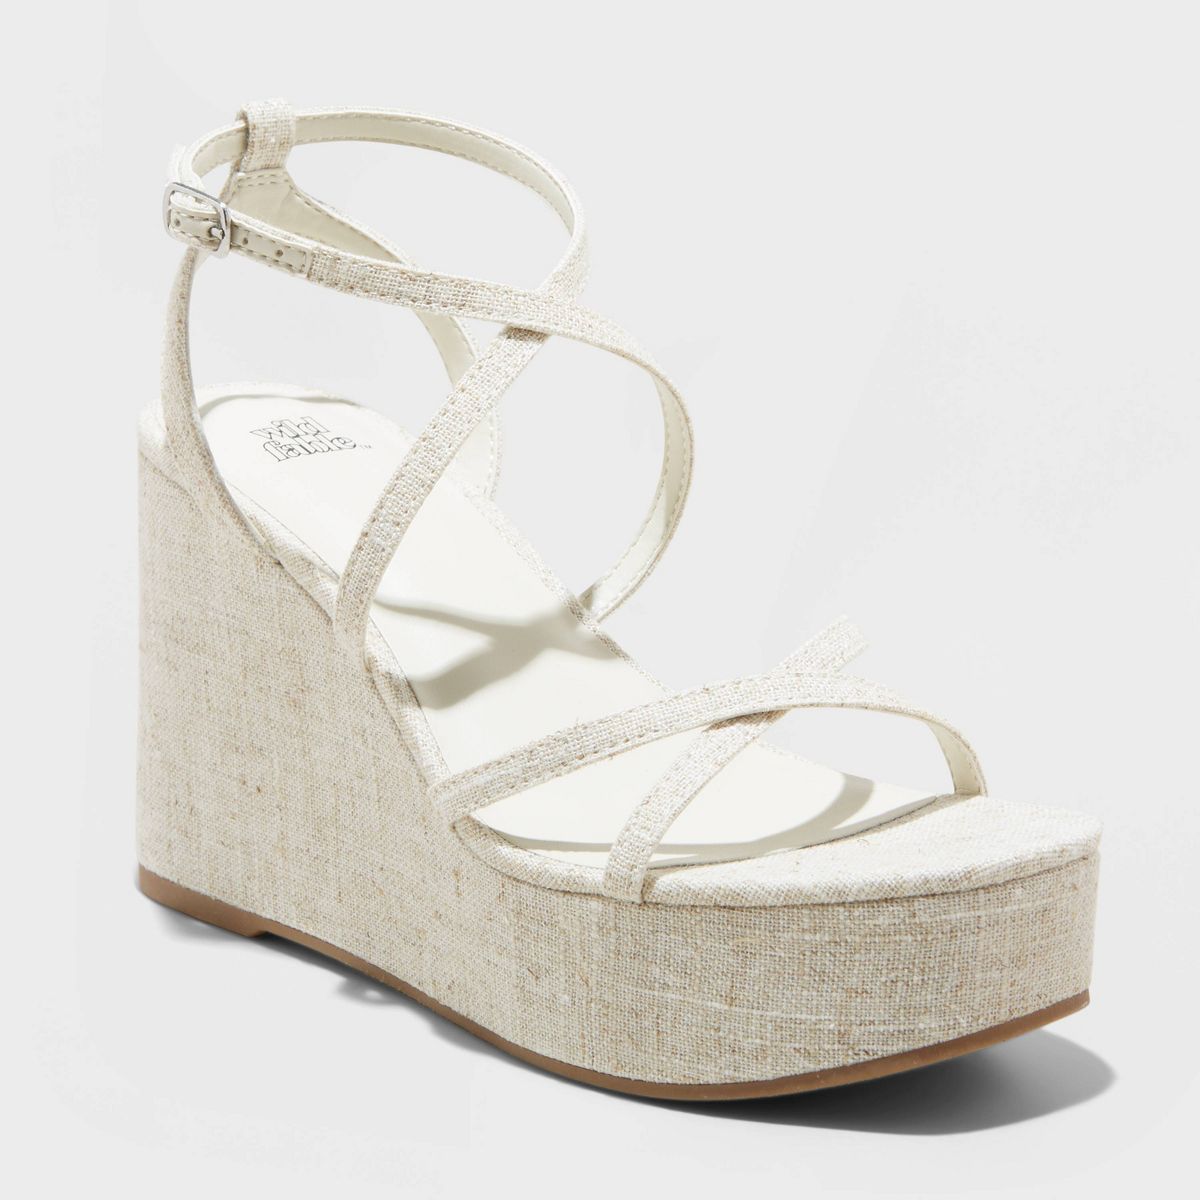 Women's Ronnie Strappy Platform Wedge Heels with Memory Foam Insole - Wild Fable™ Cream 5 | Target